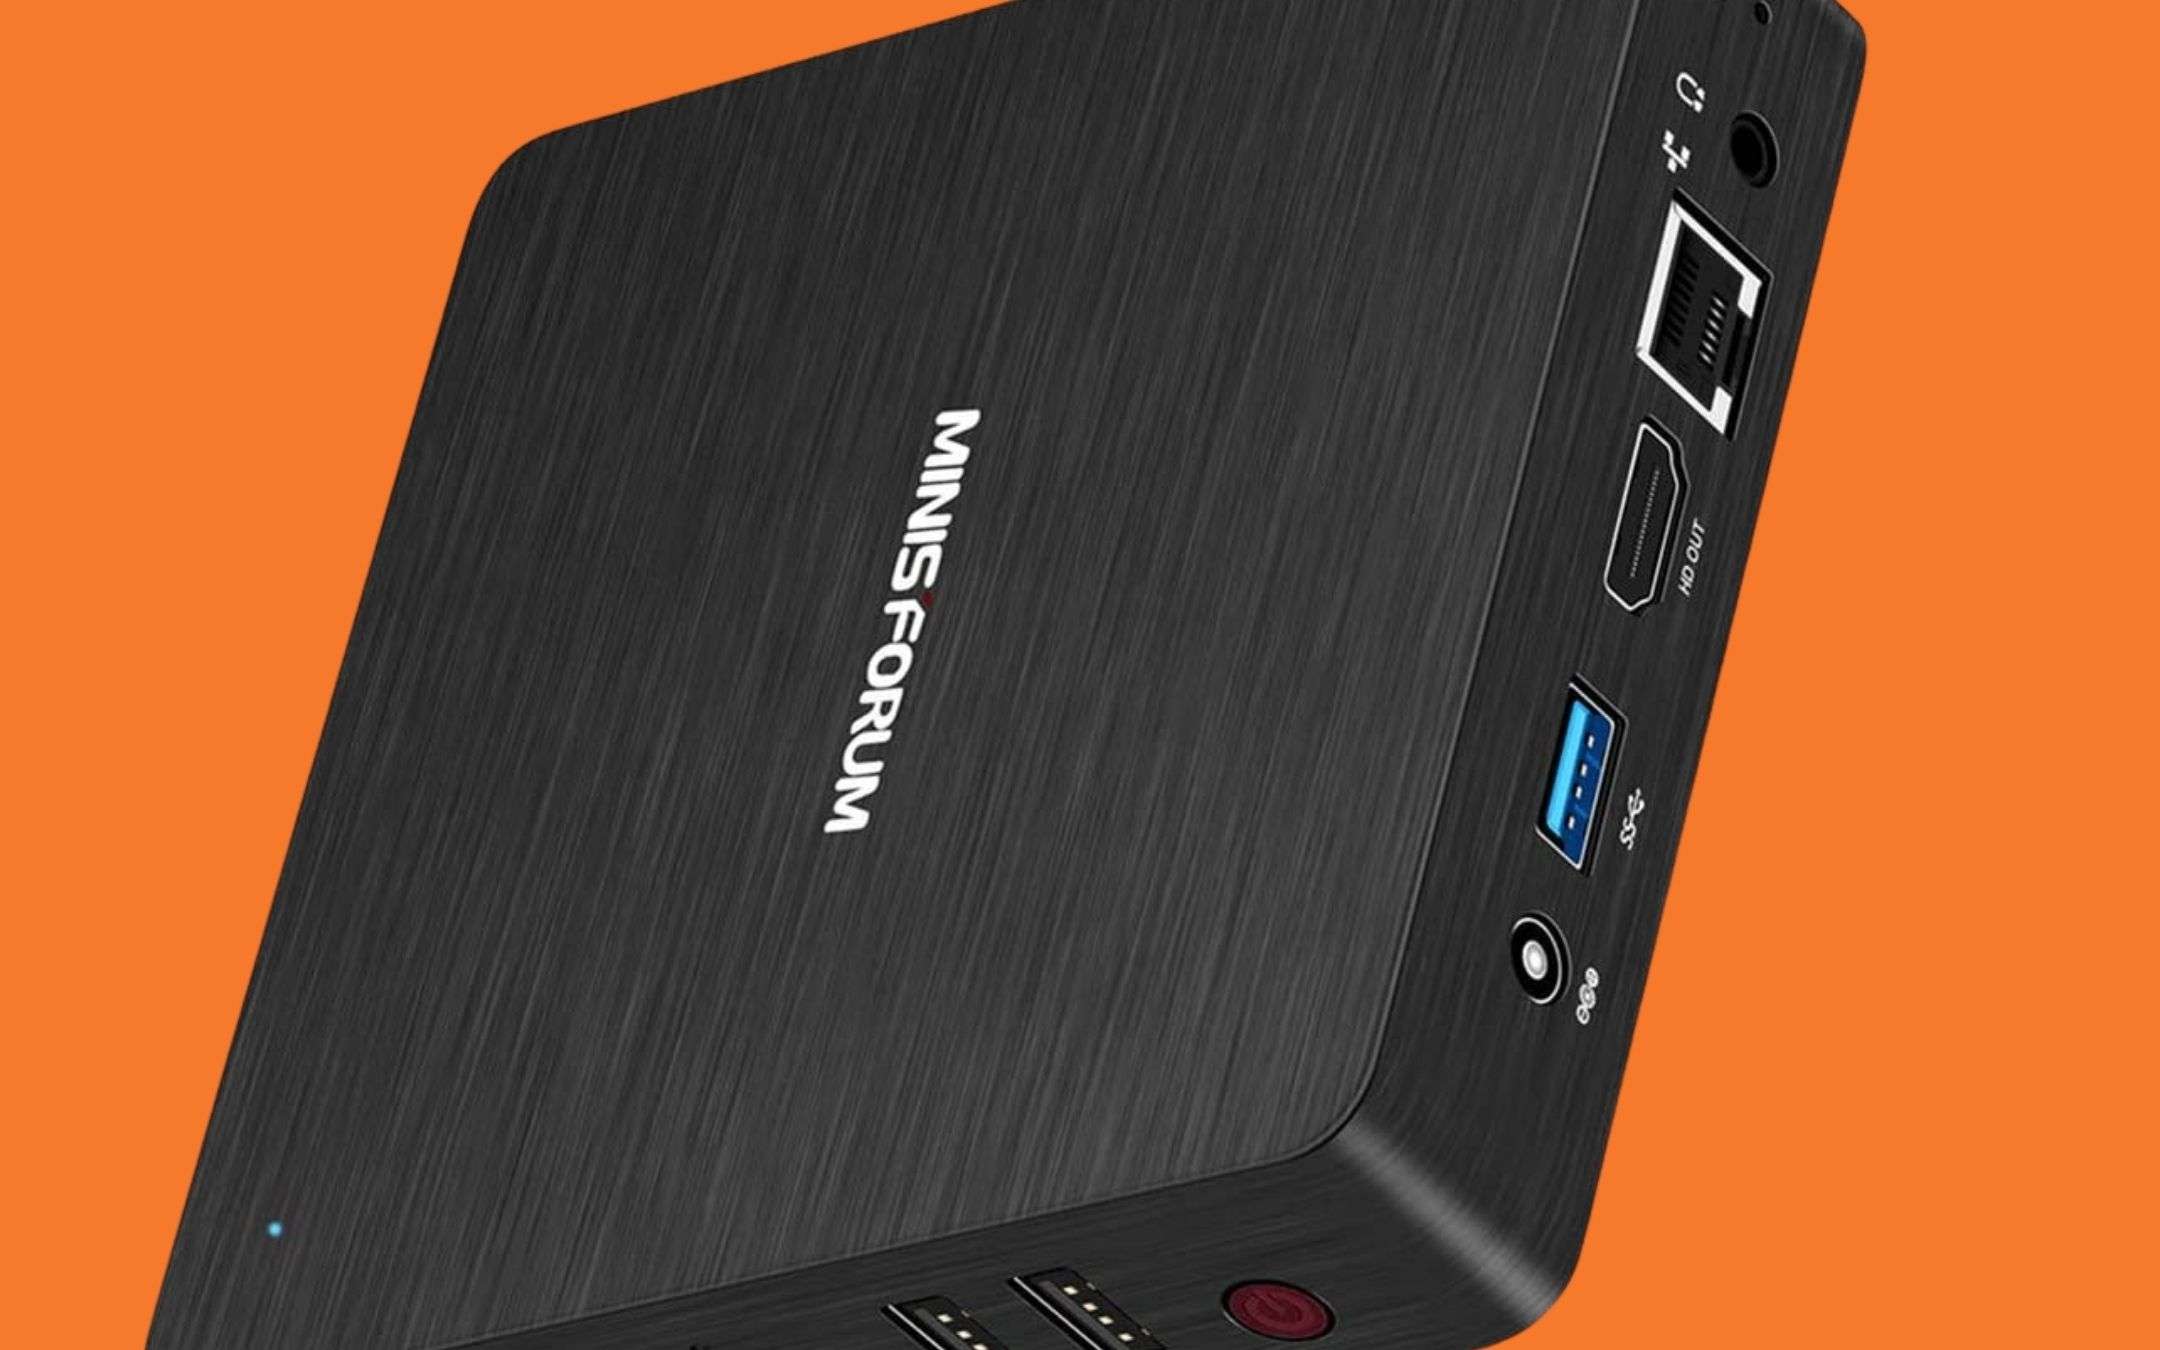 A mini PC for just over € 100 on Amazon, for a little